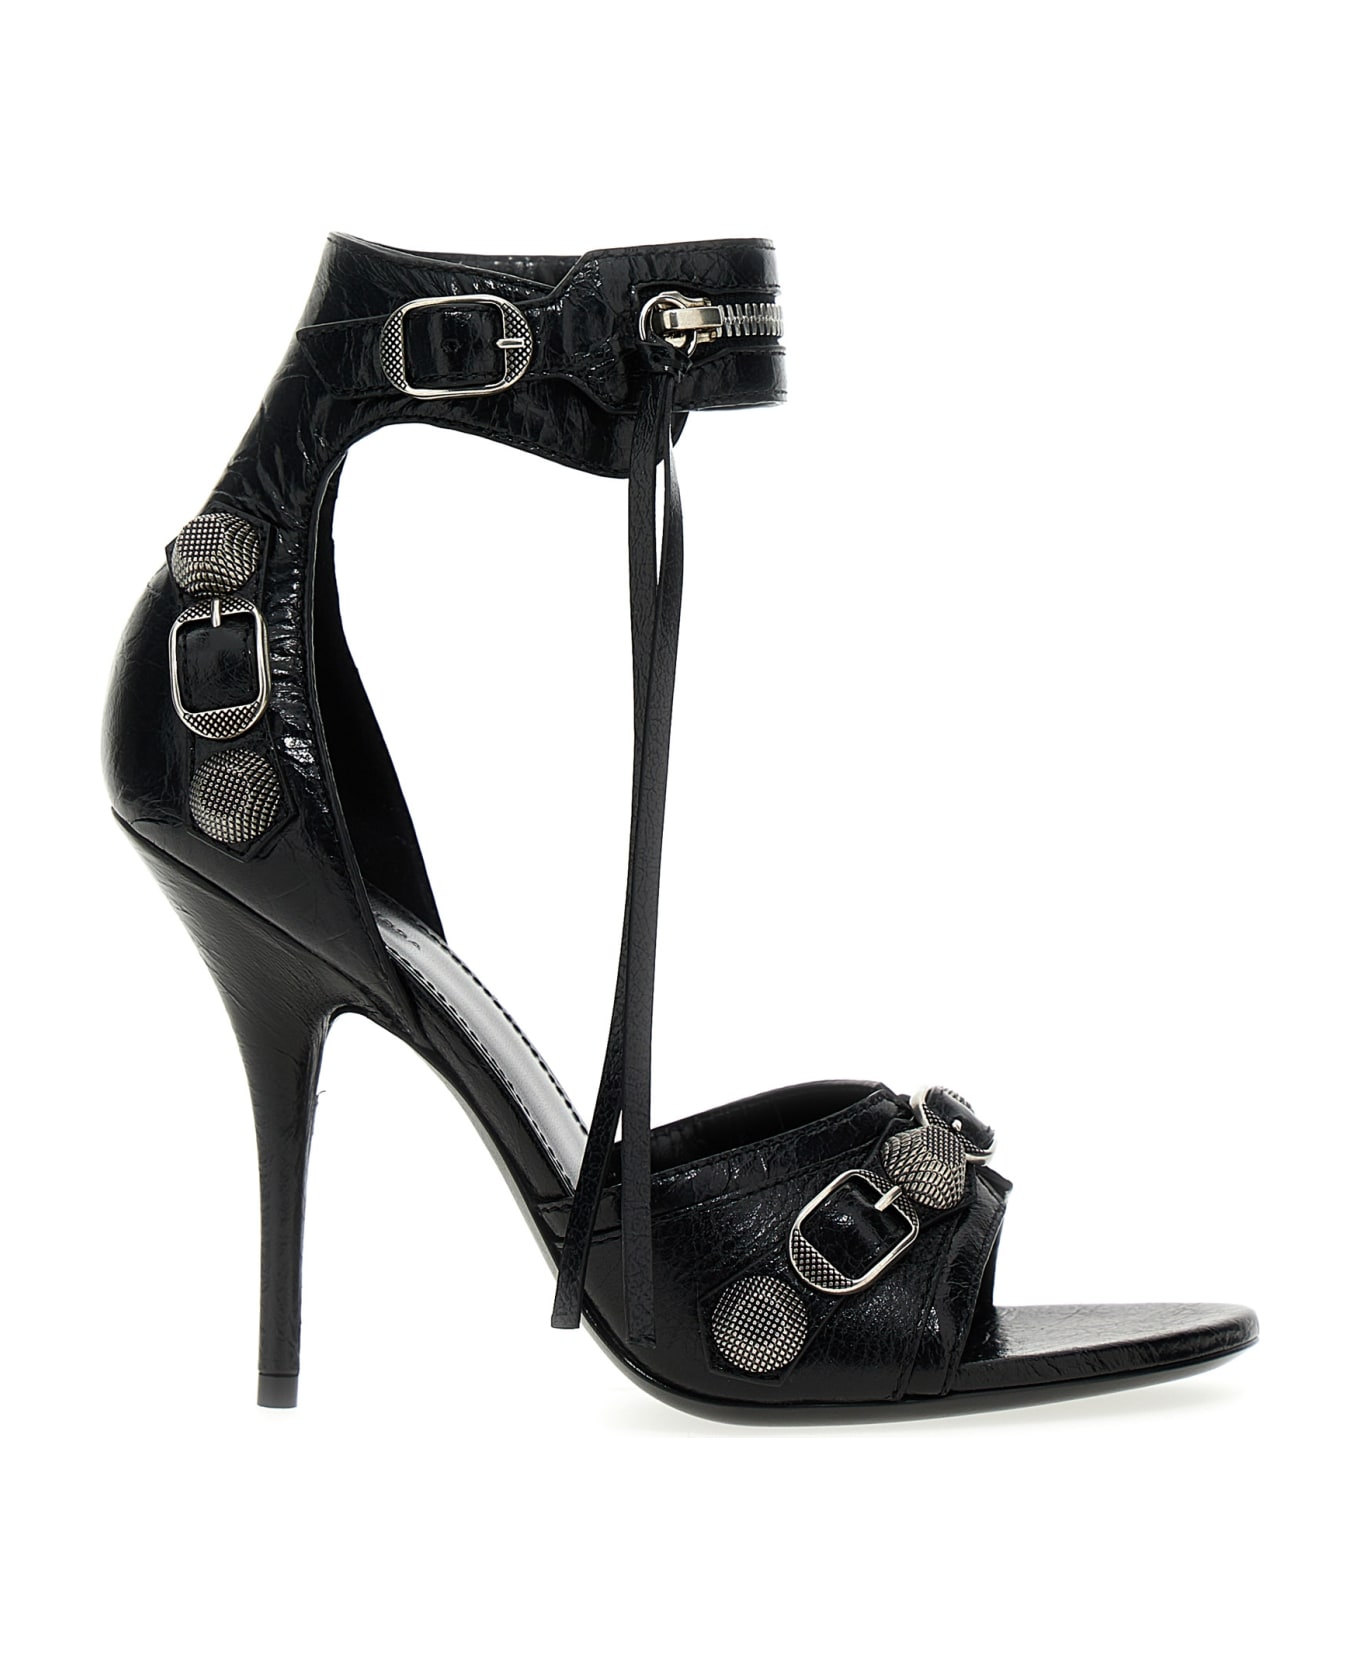 Balenciaga Sandals With Studs And Buckles In Leather - Black サンダル